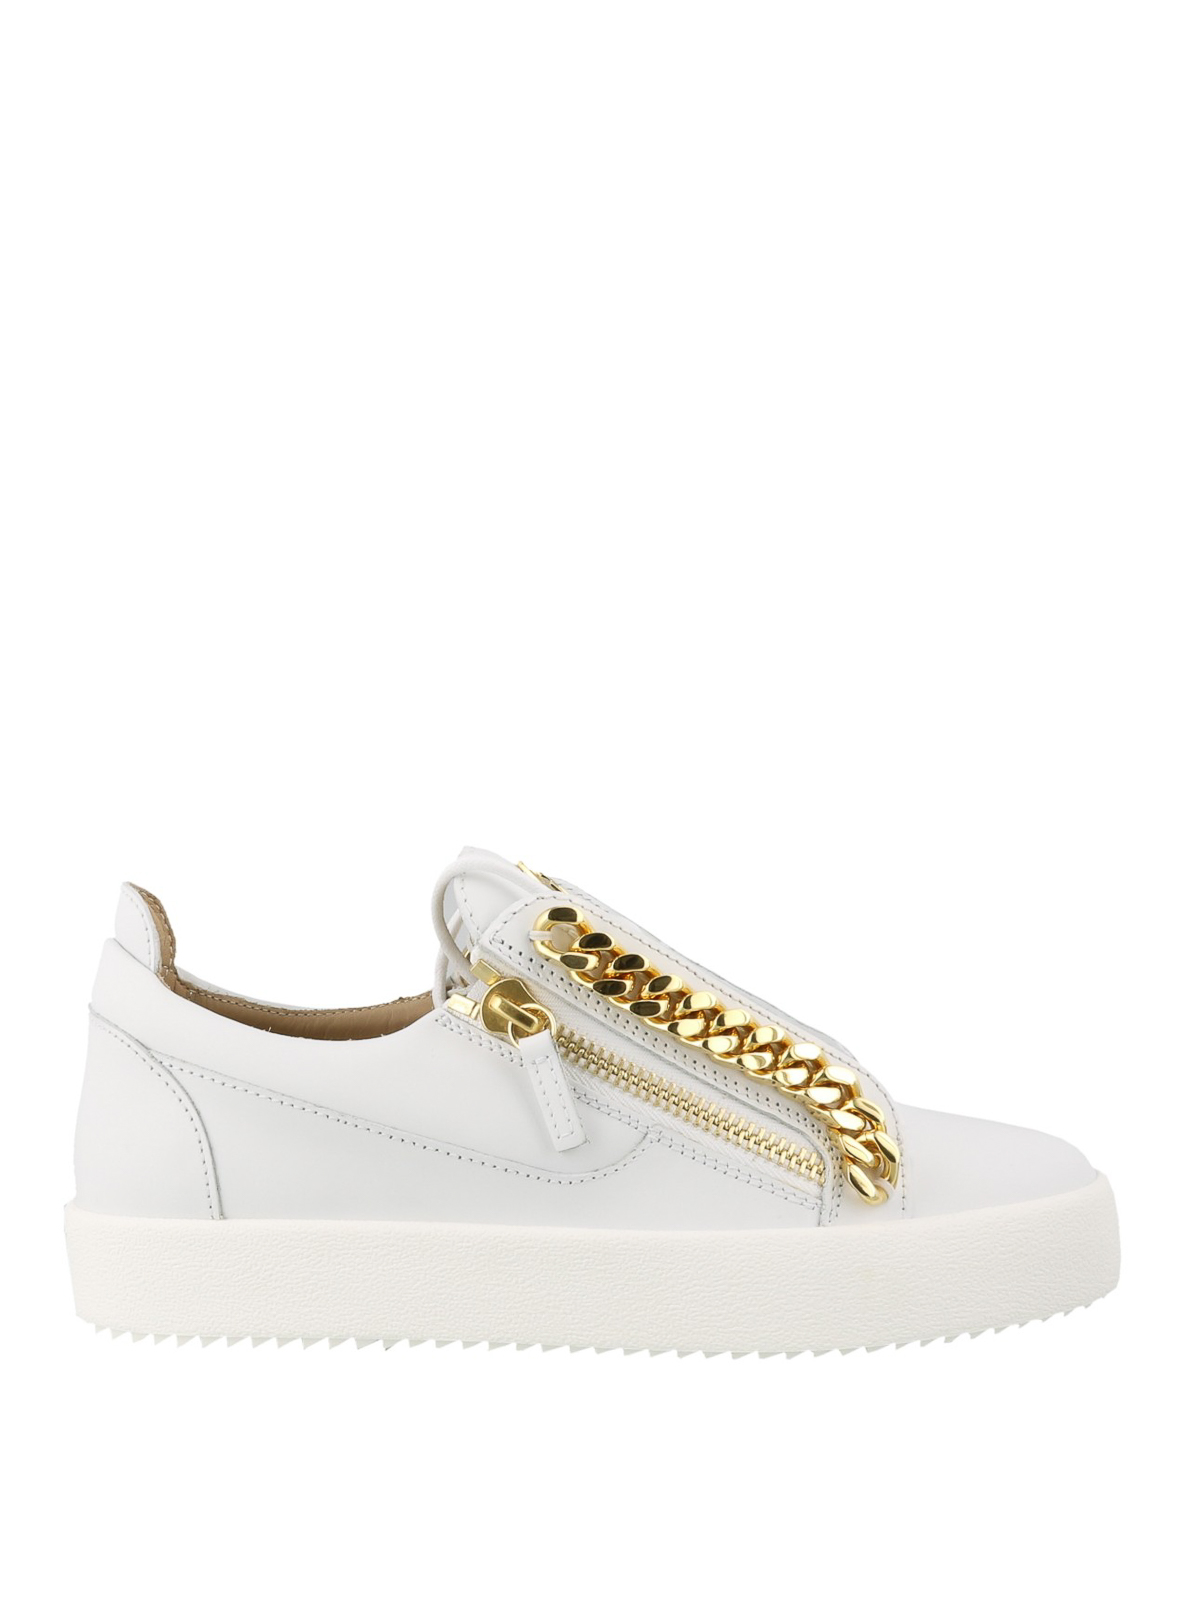 white shoes with gold chain